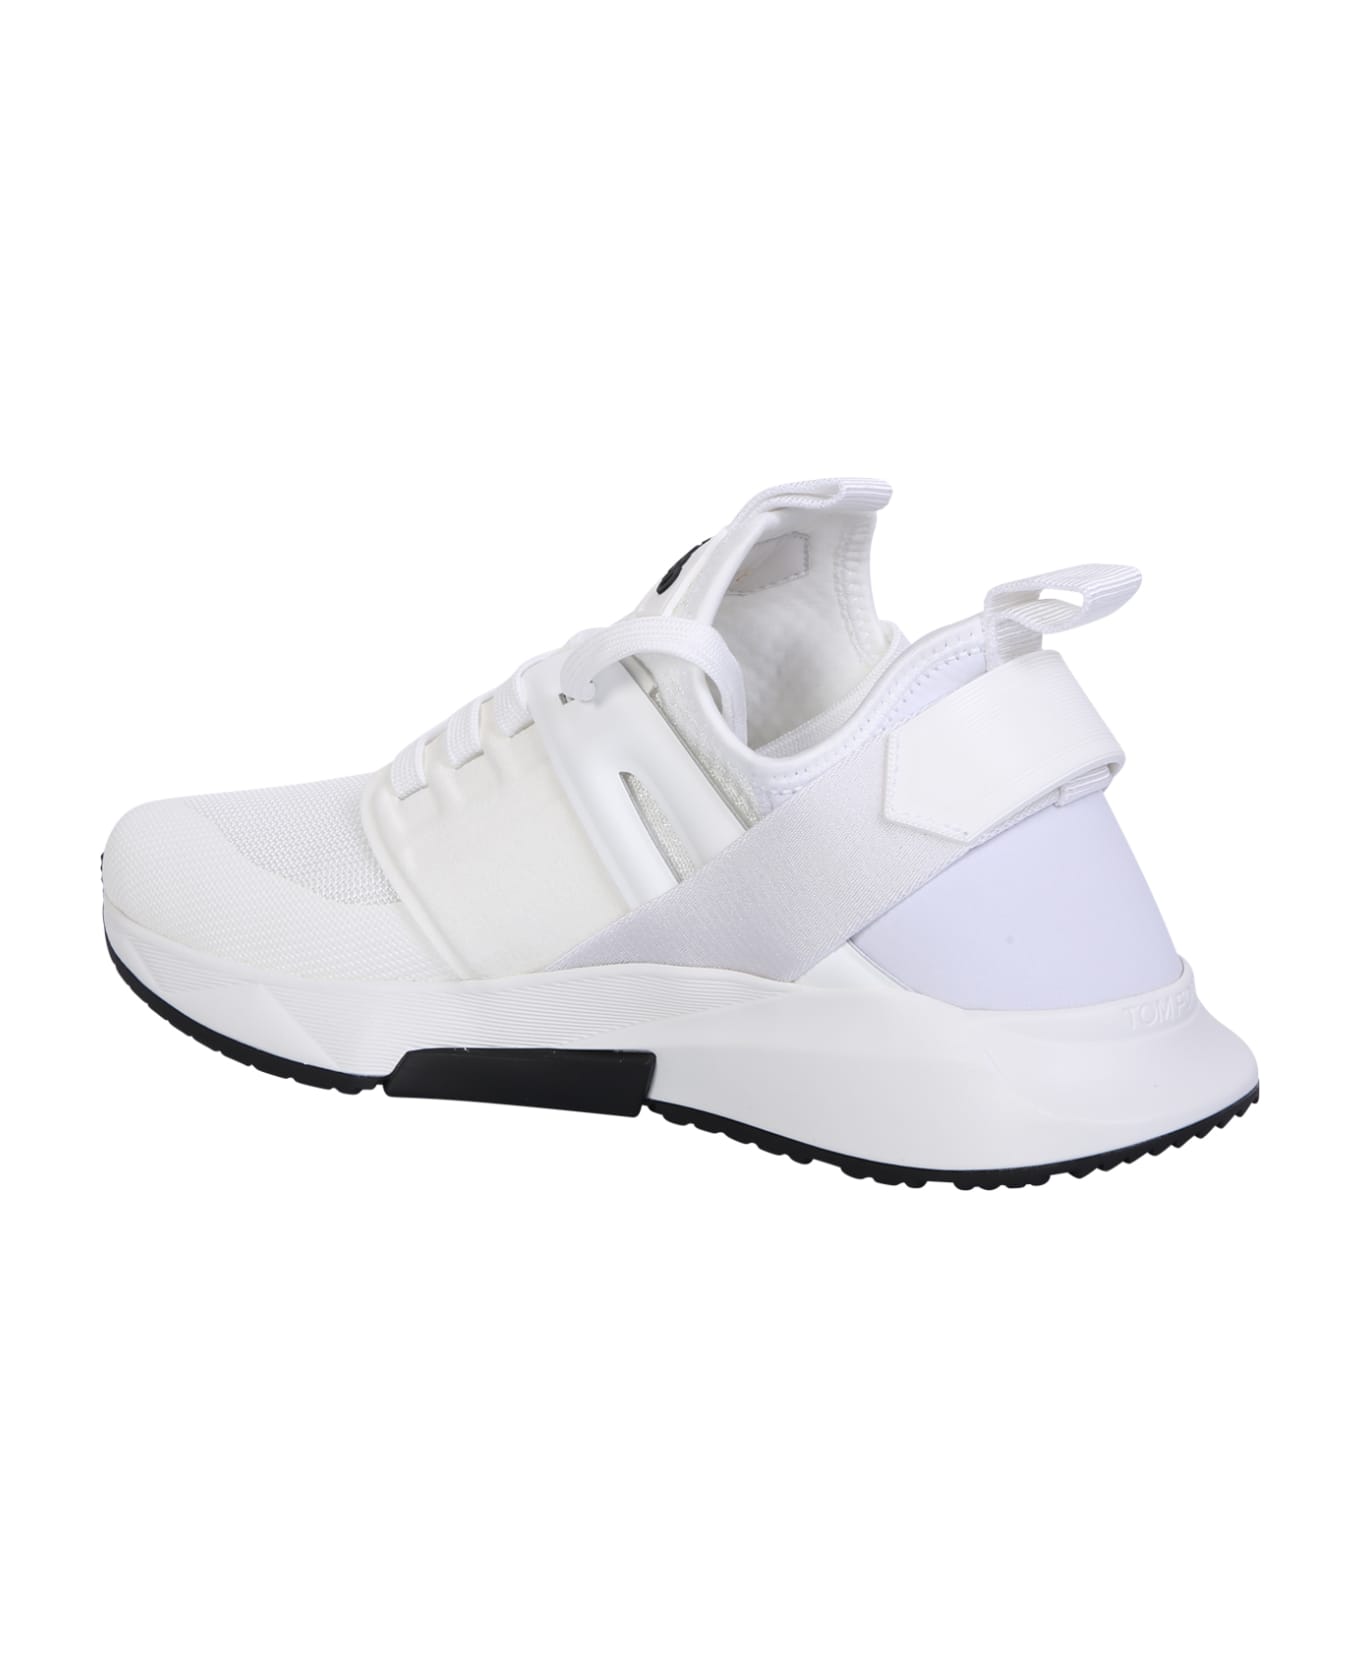 Tom Ford 'jago' Sneakers - White